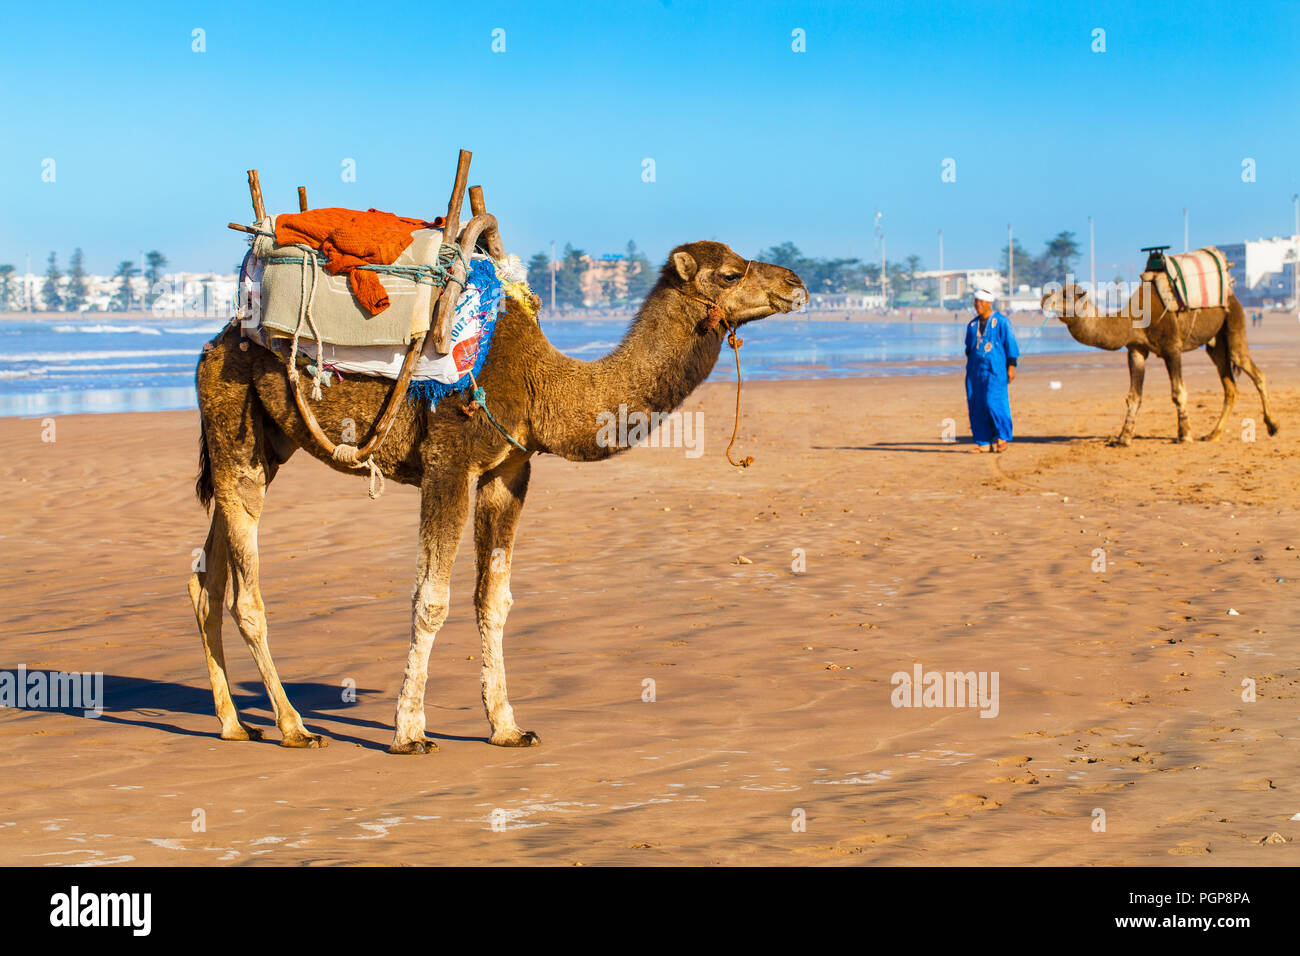 Camels on the beach in Essouira, Morocco. The camels have saddles, waiting to give rides to paying customers. Stock Photo